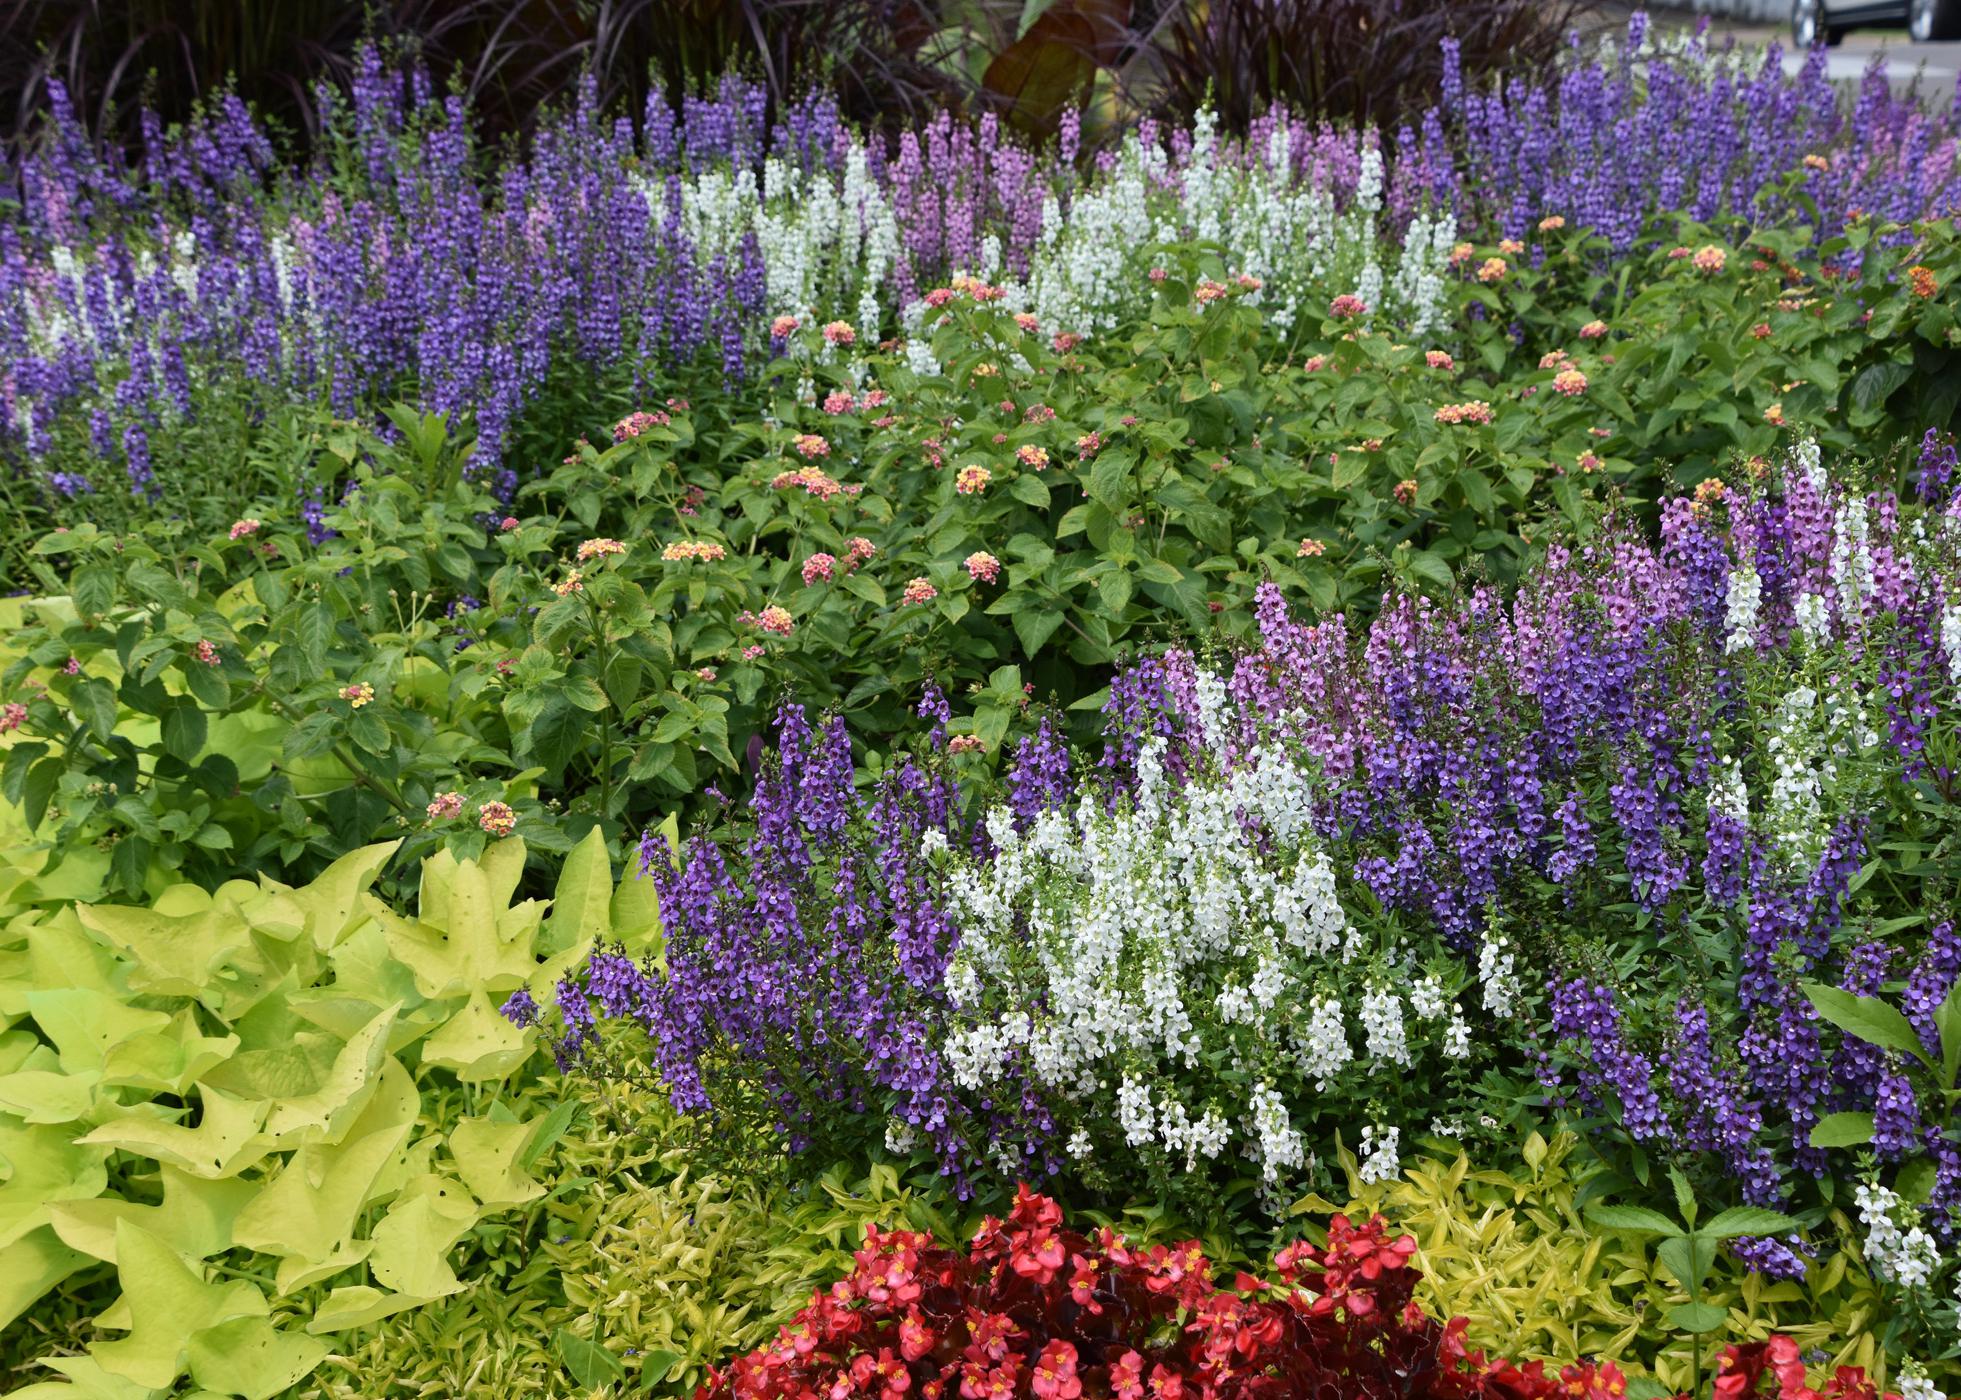 White and purple flower stalks are massed in a bed with a variety of pink flowers and different colors and shapes of green leaves.